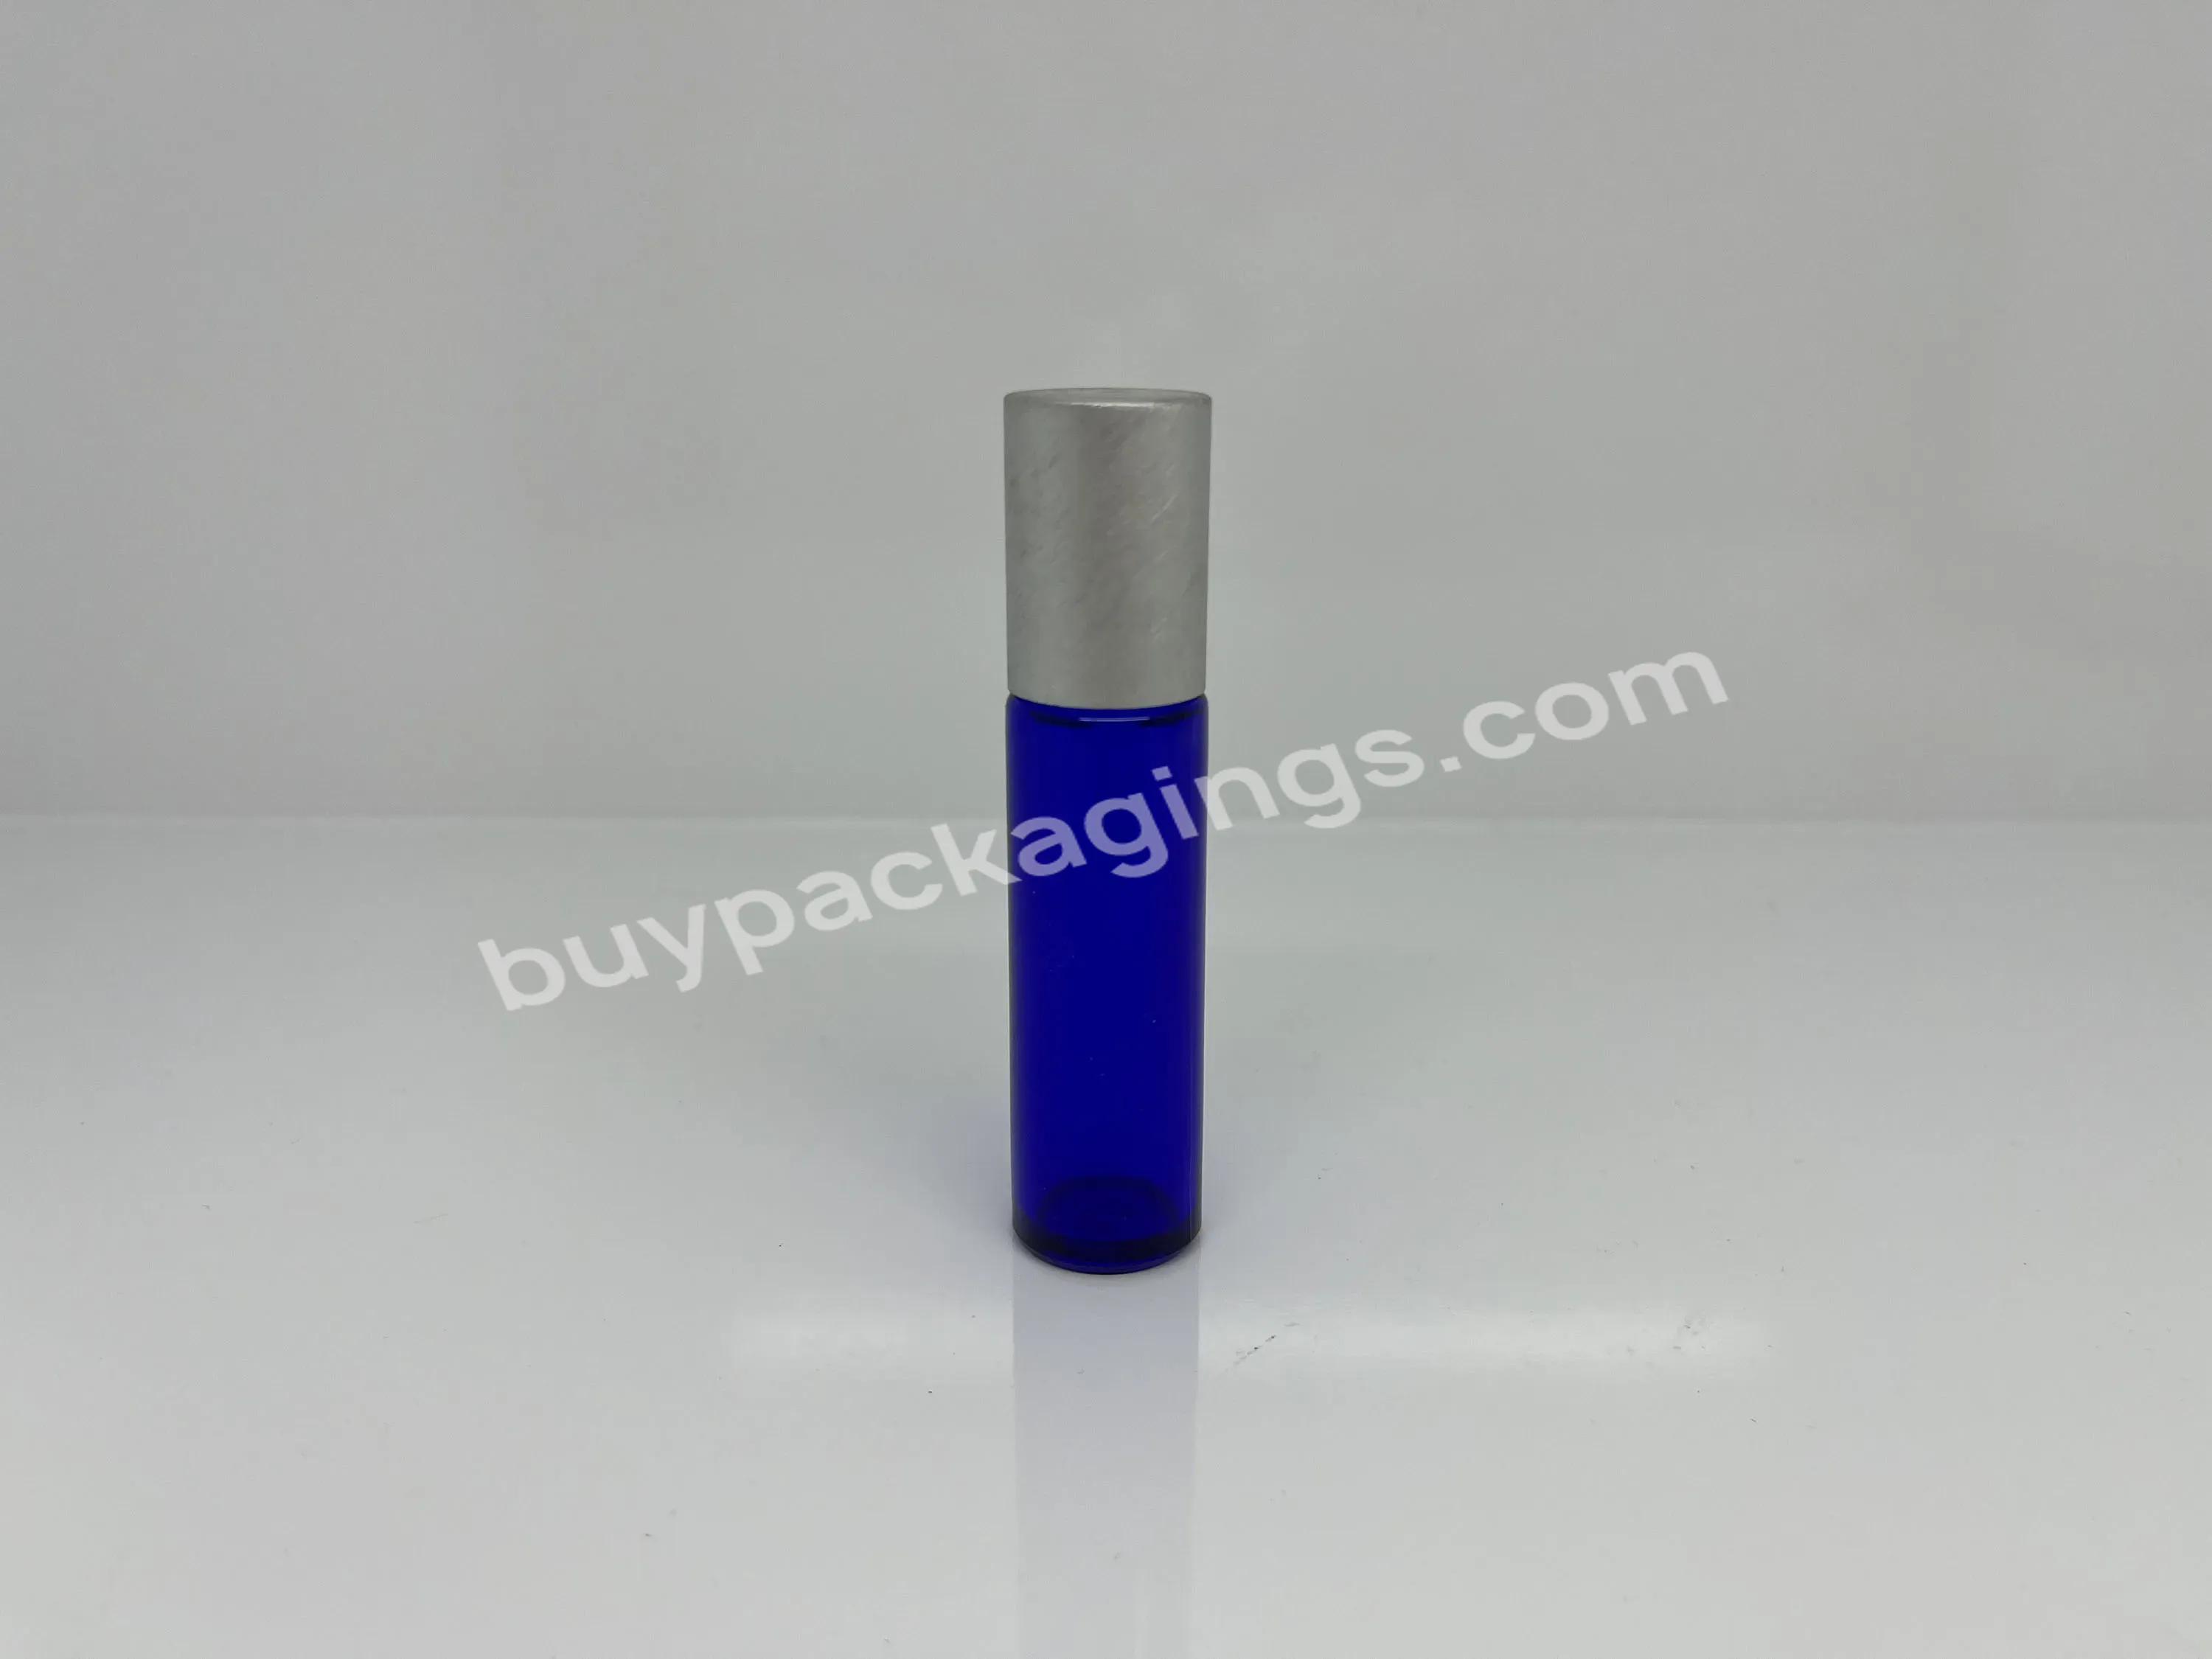 10ml Wholesale Brushed Cover Roll On Bottle Matte Color Glass Bottle Color Cover Perfume Separate Essential Oil Bottle - Buy 10ml Wholesale Brushed Cover Roll On Bottle,Matte Color Glass Bottle,Color Cover Perfume Separate Lip Oil Bottle.